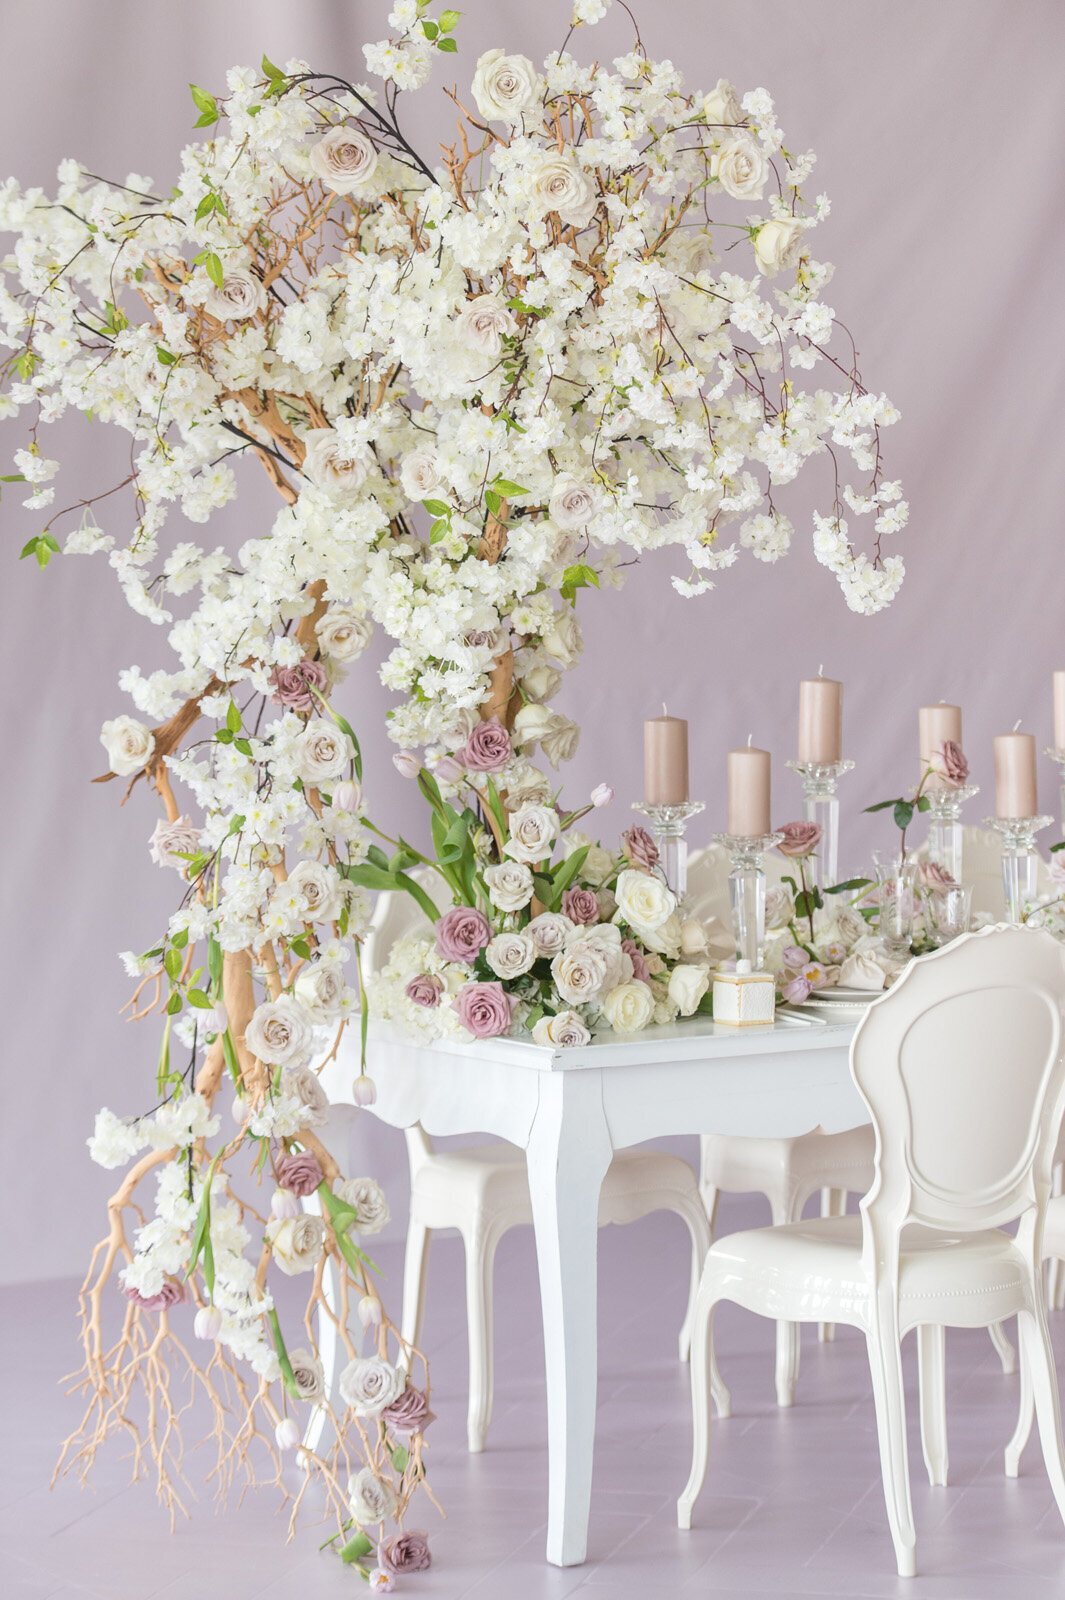 Diana-Pires-Events-Fiore-Wedluxe-25